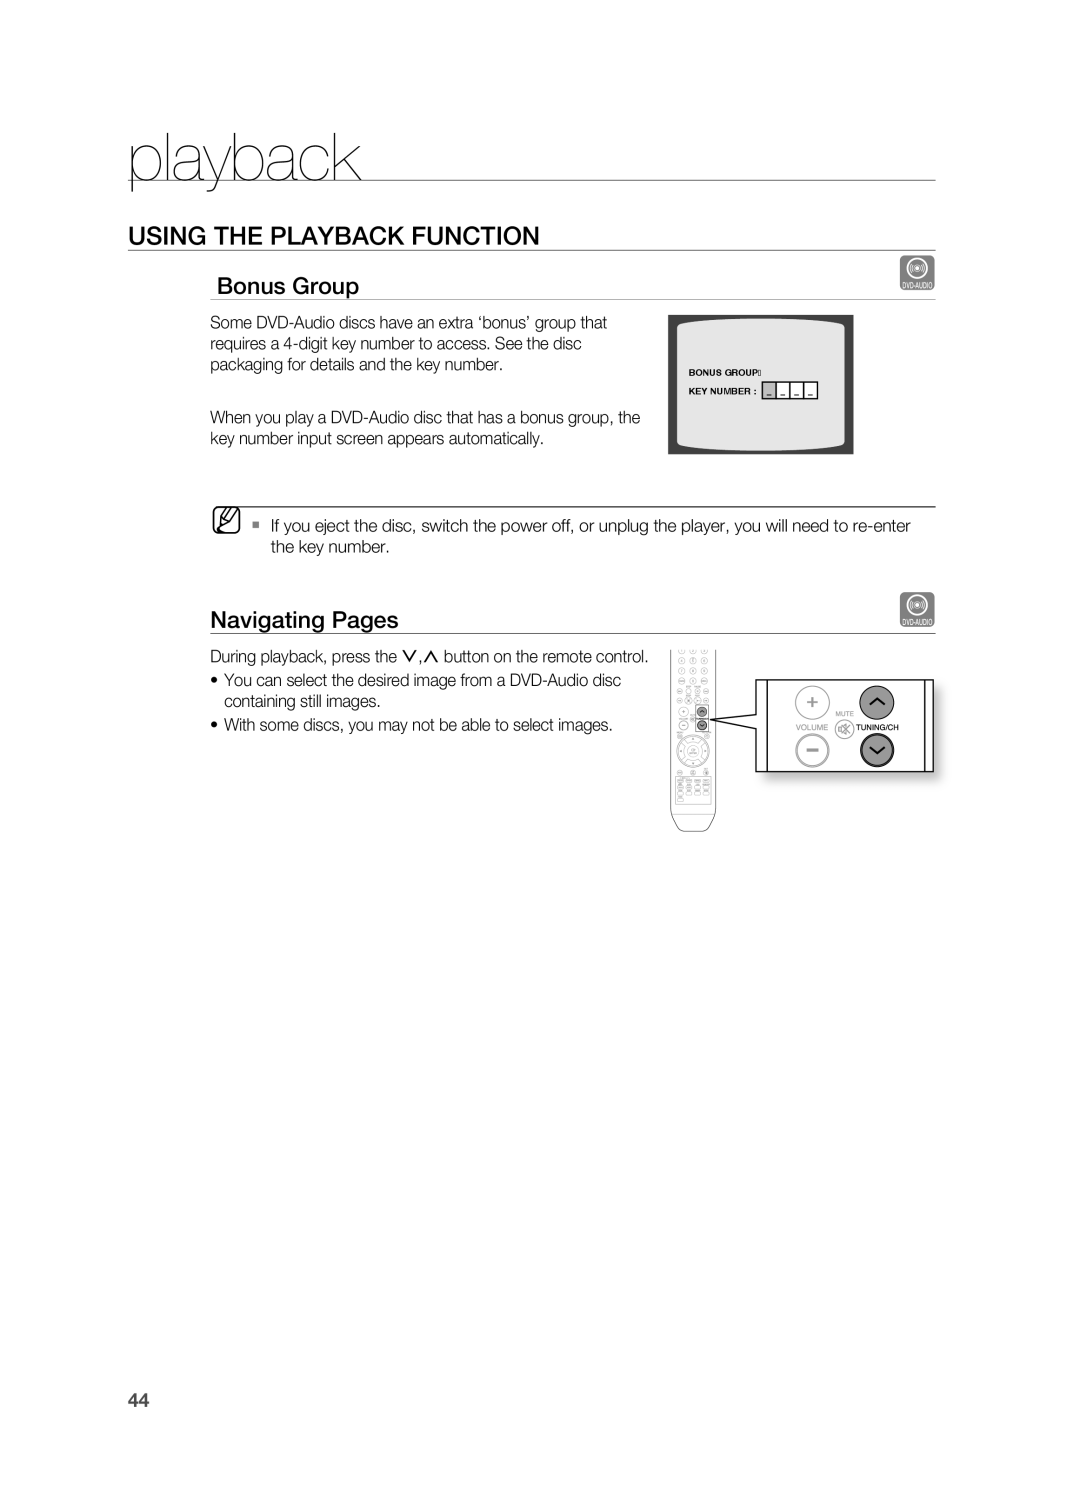 Samsung HT-TWZ315 manual navigating Pages, playback, USinG tHE PLAyBACK fUnCtiOn, Bonus Group Key Number 